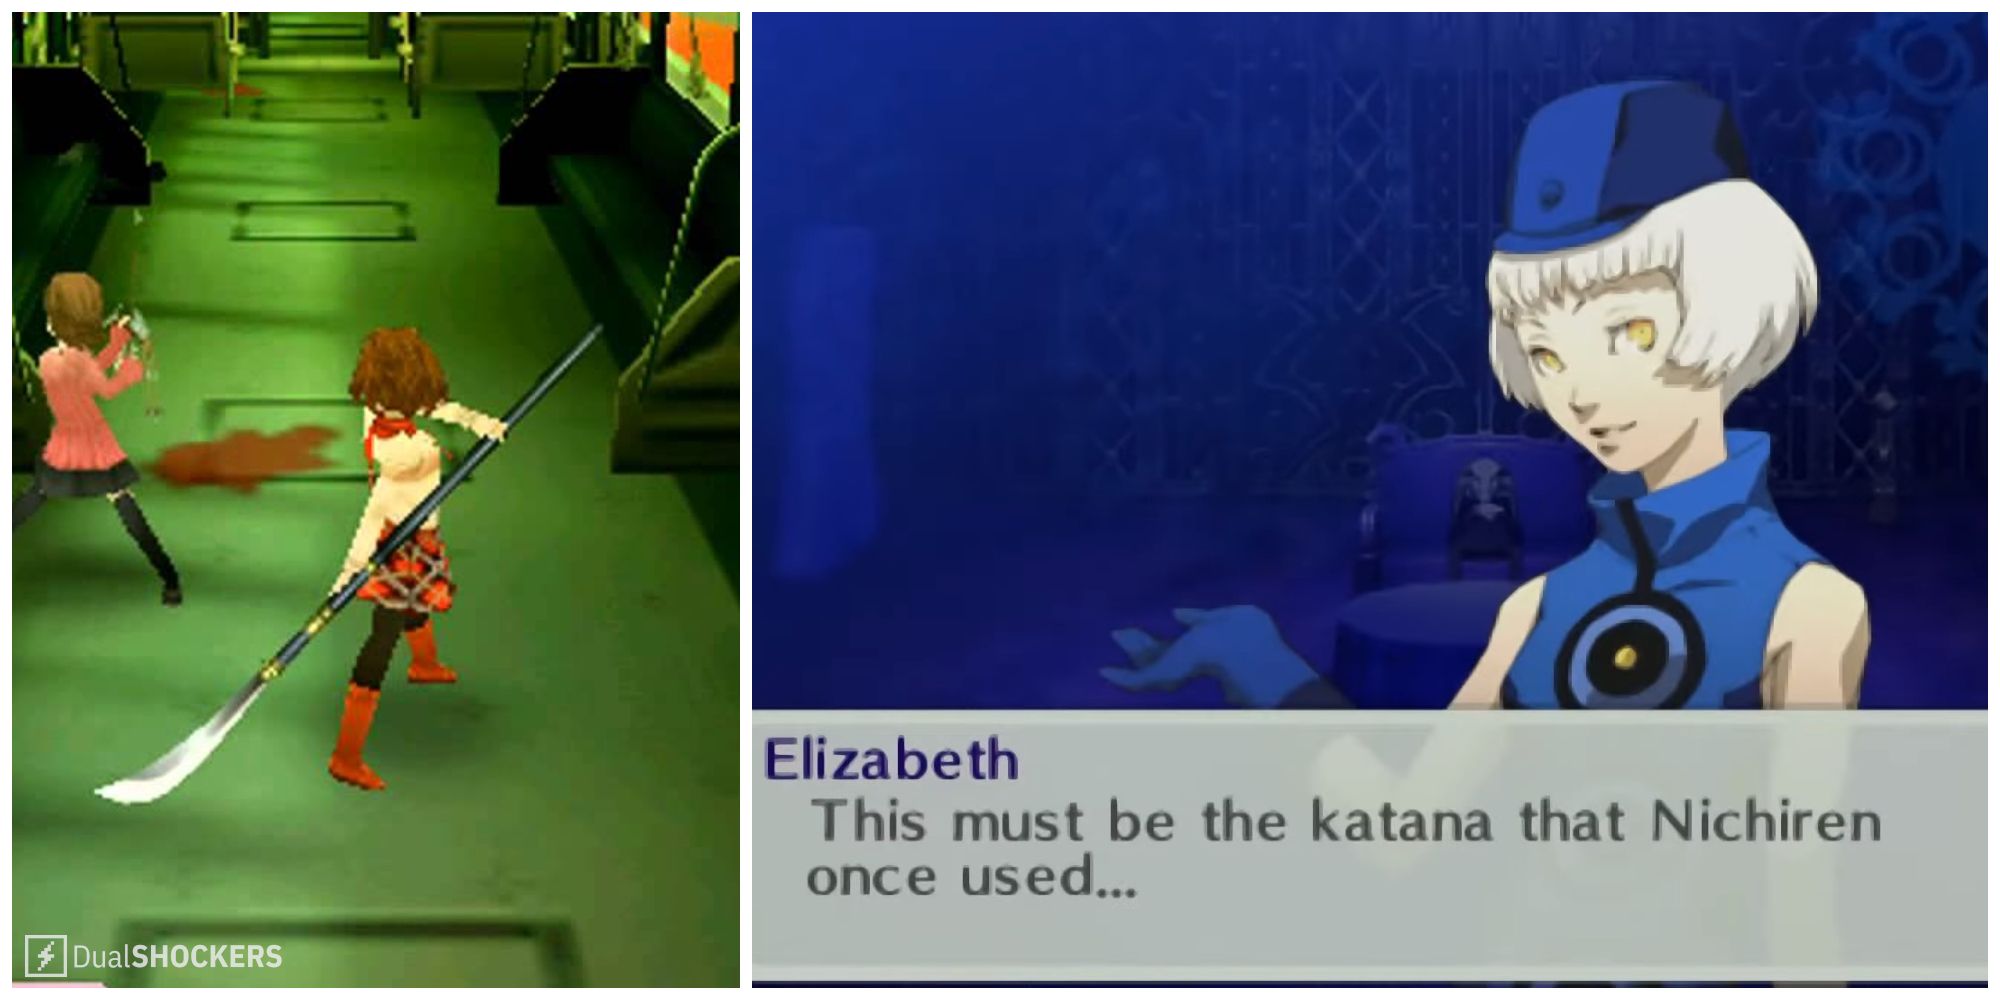 Split image of a character with the Juzumaru weapon and Elizabeth after receiving the weapon in Persona 3 Portable.